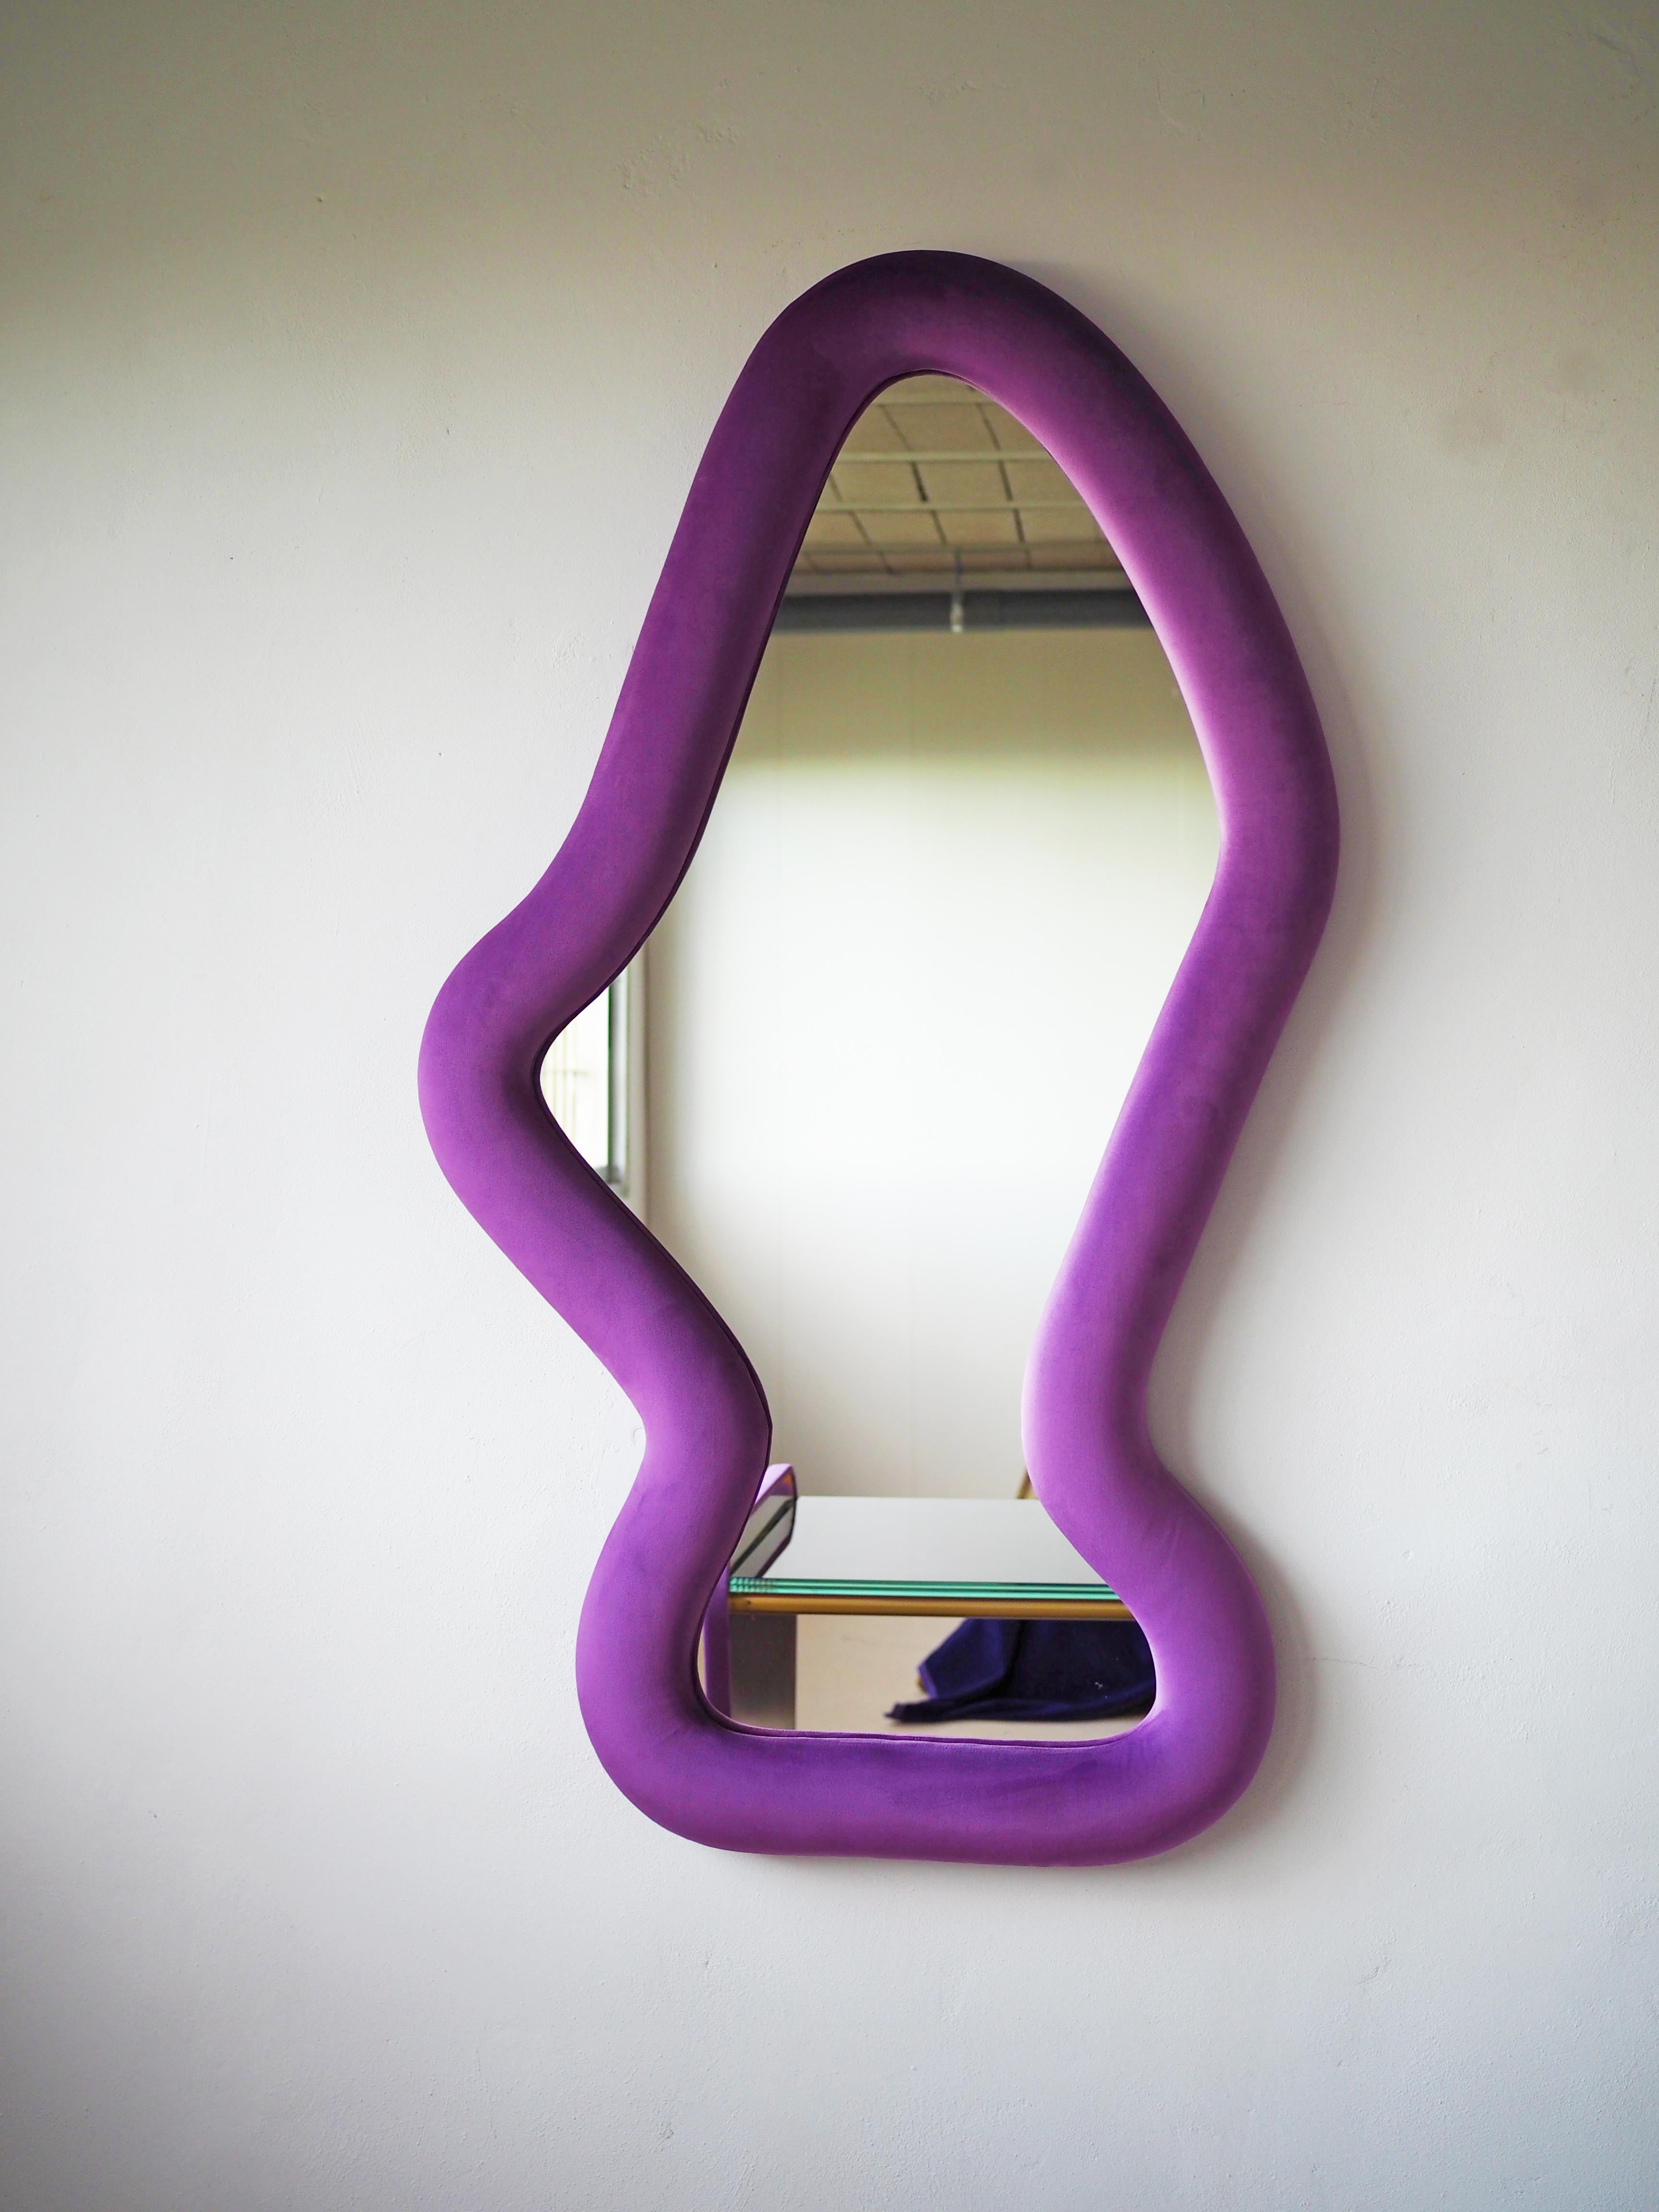 Bharani mirror by Culto Ponsoda
Dimensions: D 8 x W 85 x H 156 cm
Materials: Velvet, wood, mirror.
Available in other colors.

Multiposition mirror with wooden frame. Padded and upholstered with velvet.

